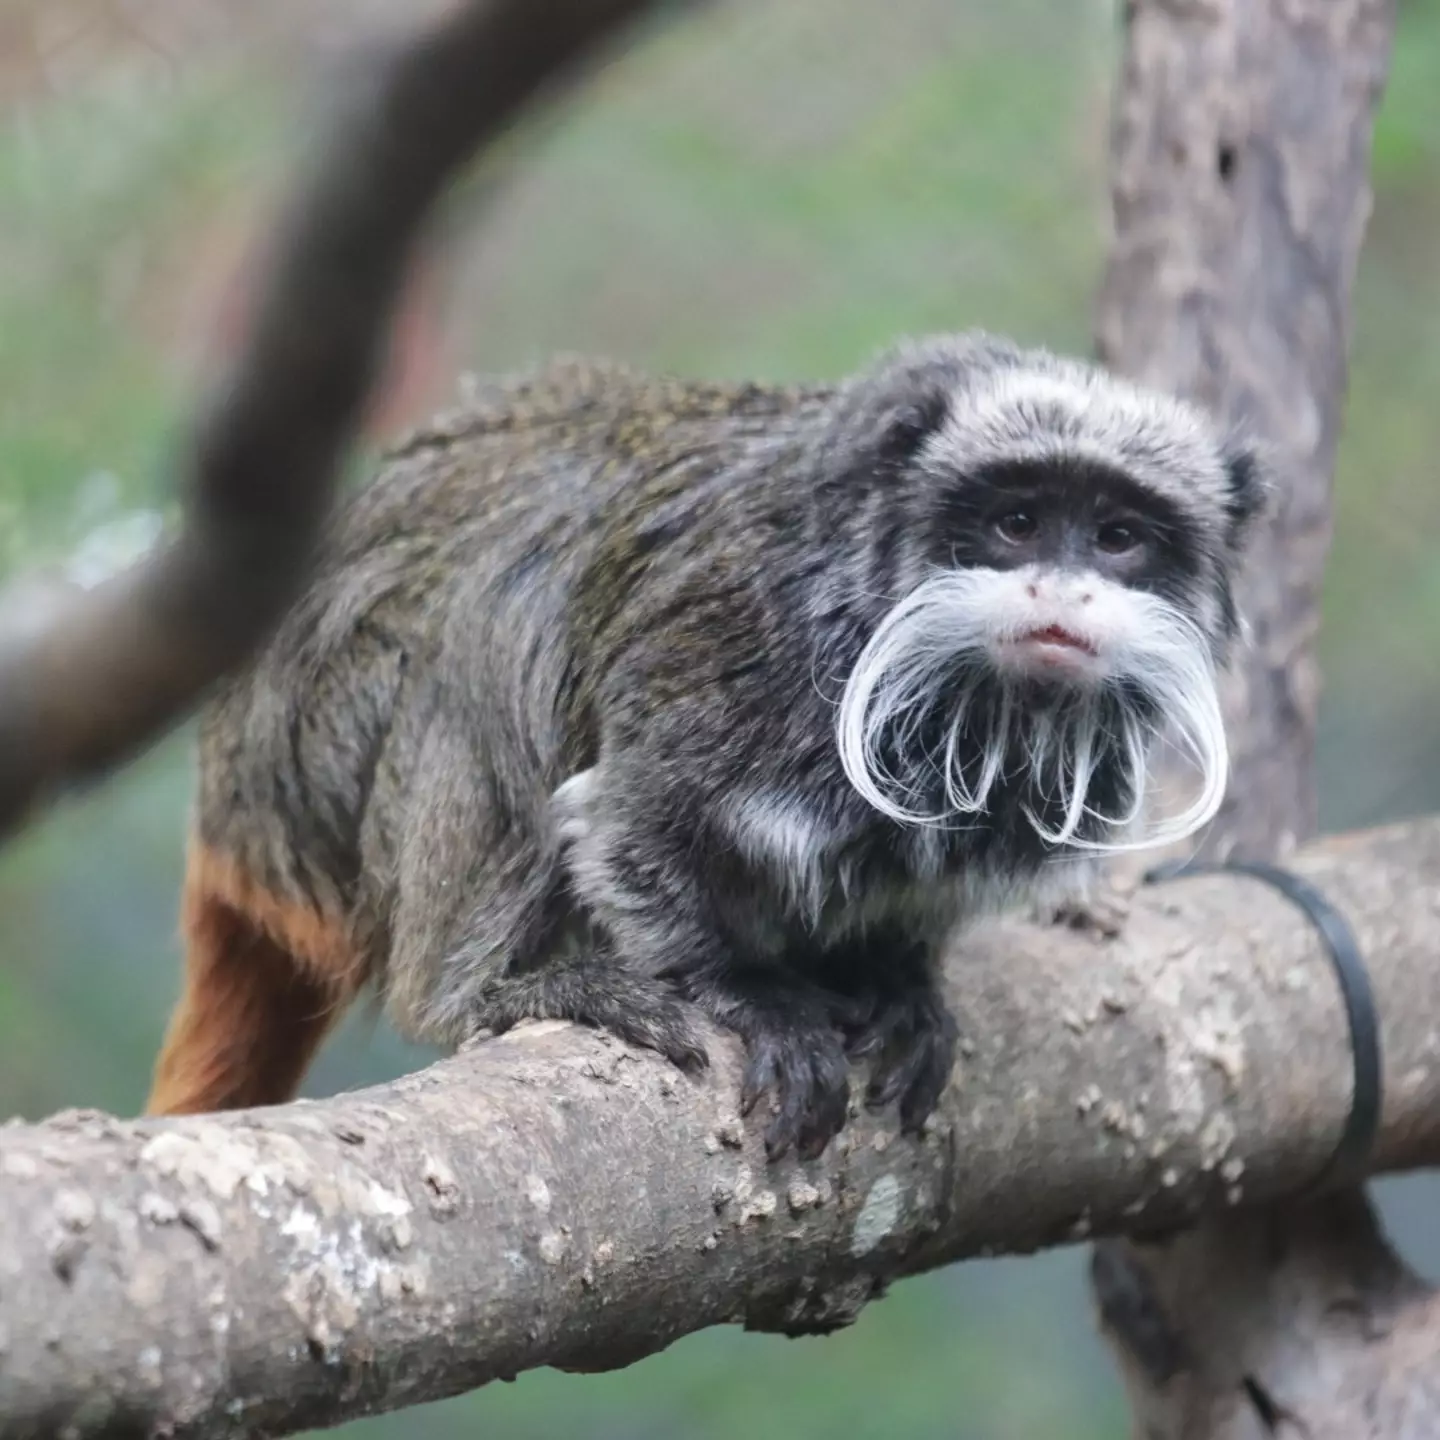 Two emperor tamarin monkeys have gone missing from their habitat.